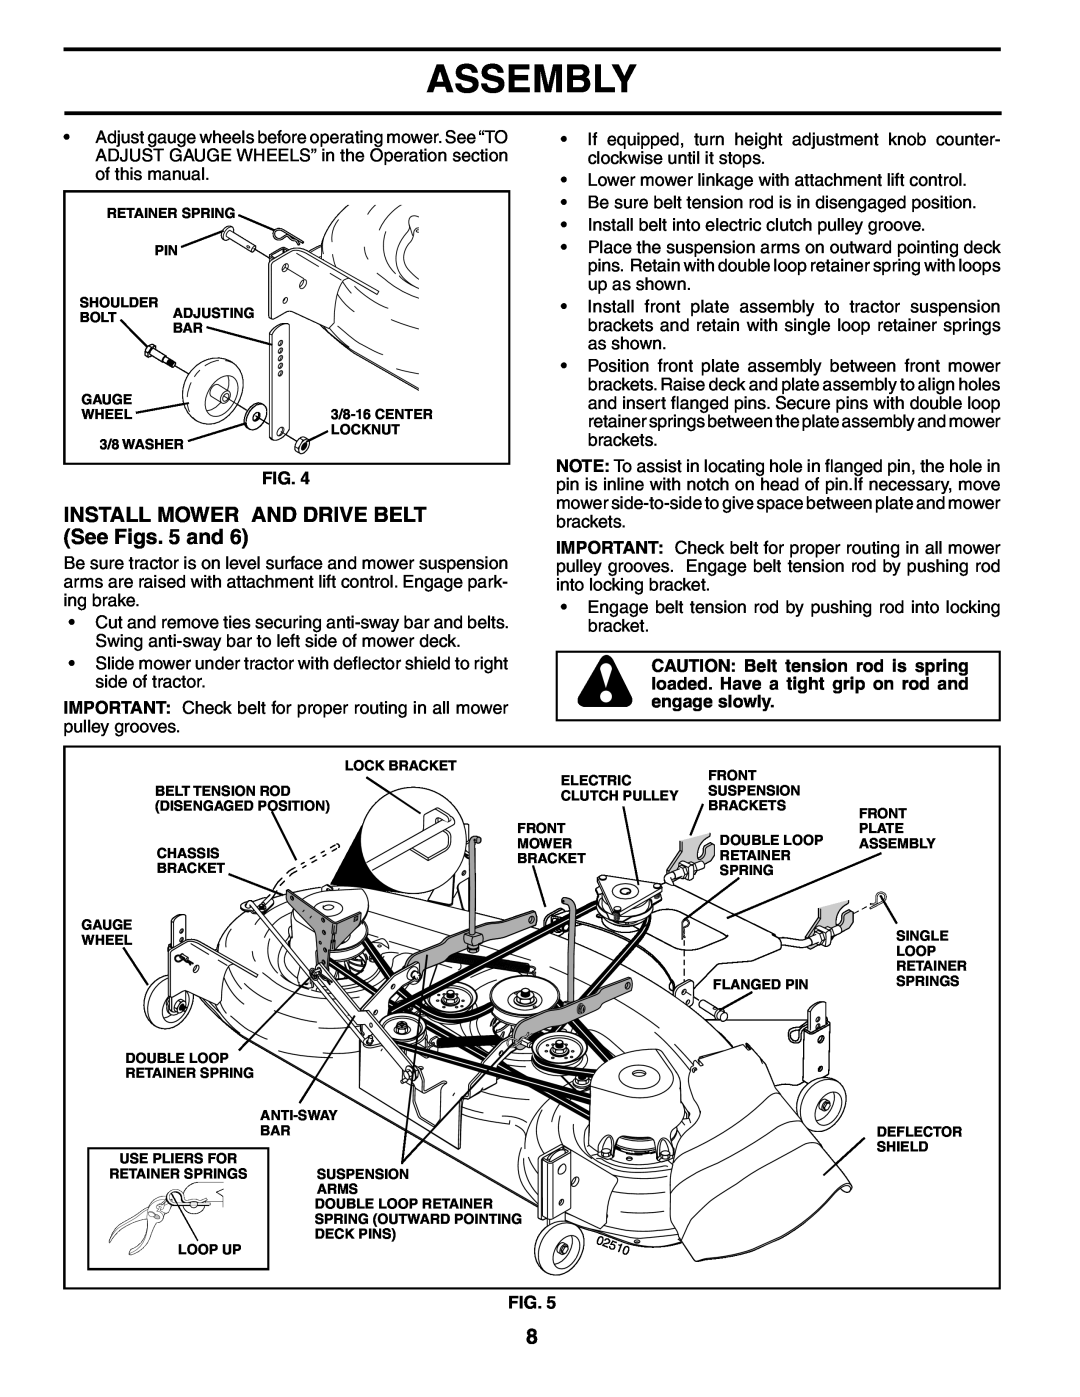 Poulan XT24H48YT manual INSTALL MOWER AND DRIVE BELT See Figs. 5 and, Assembly 